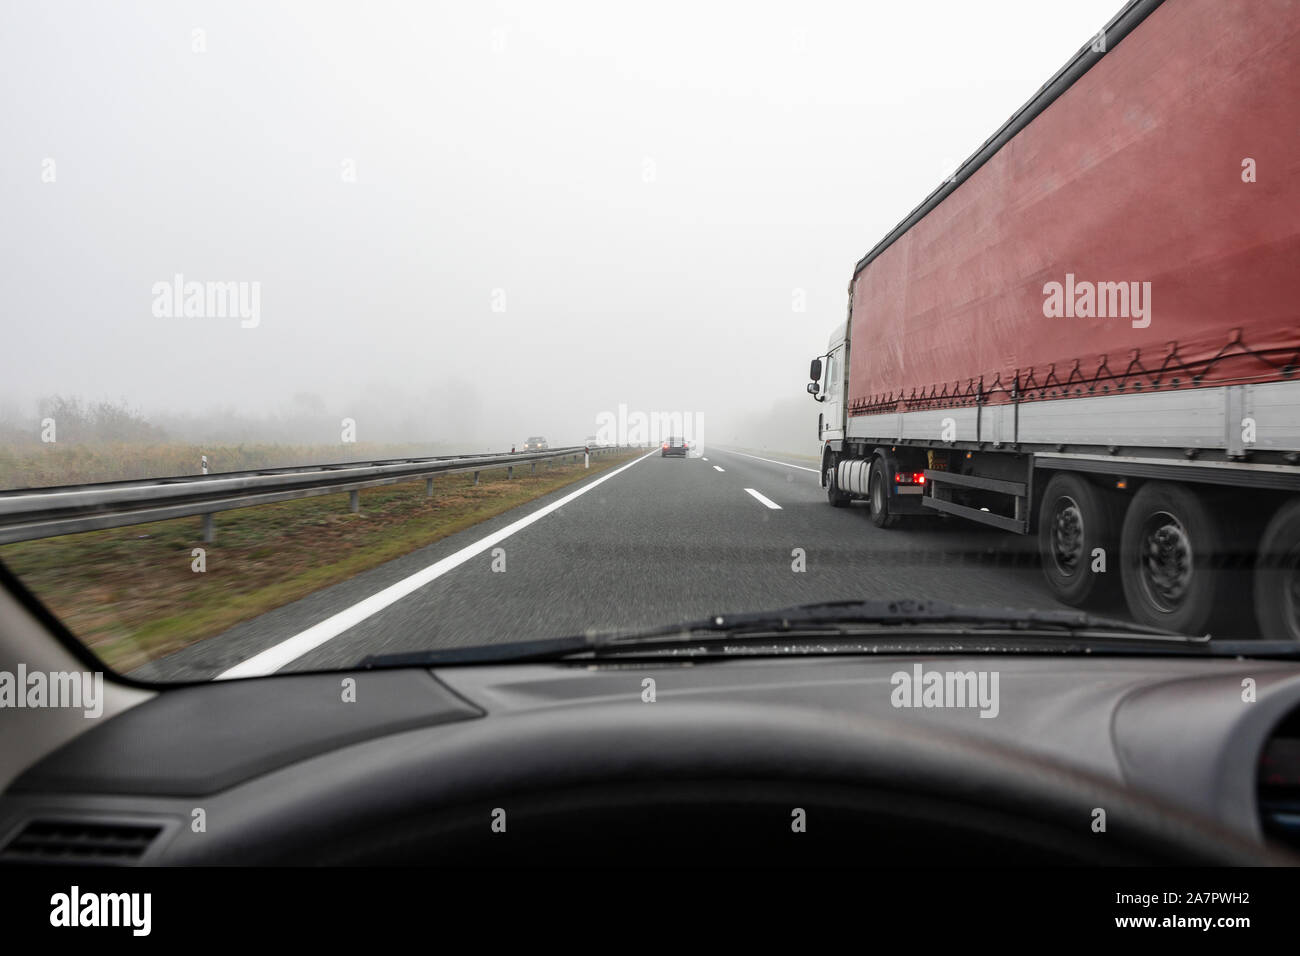 Overtaking truck on the highway in bad visbility Stock Photo